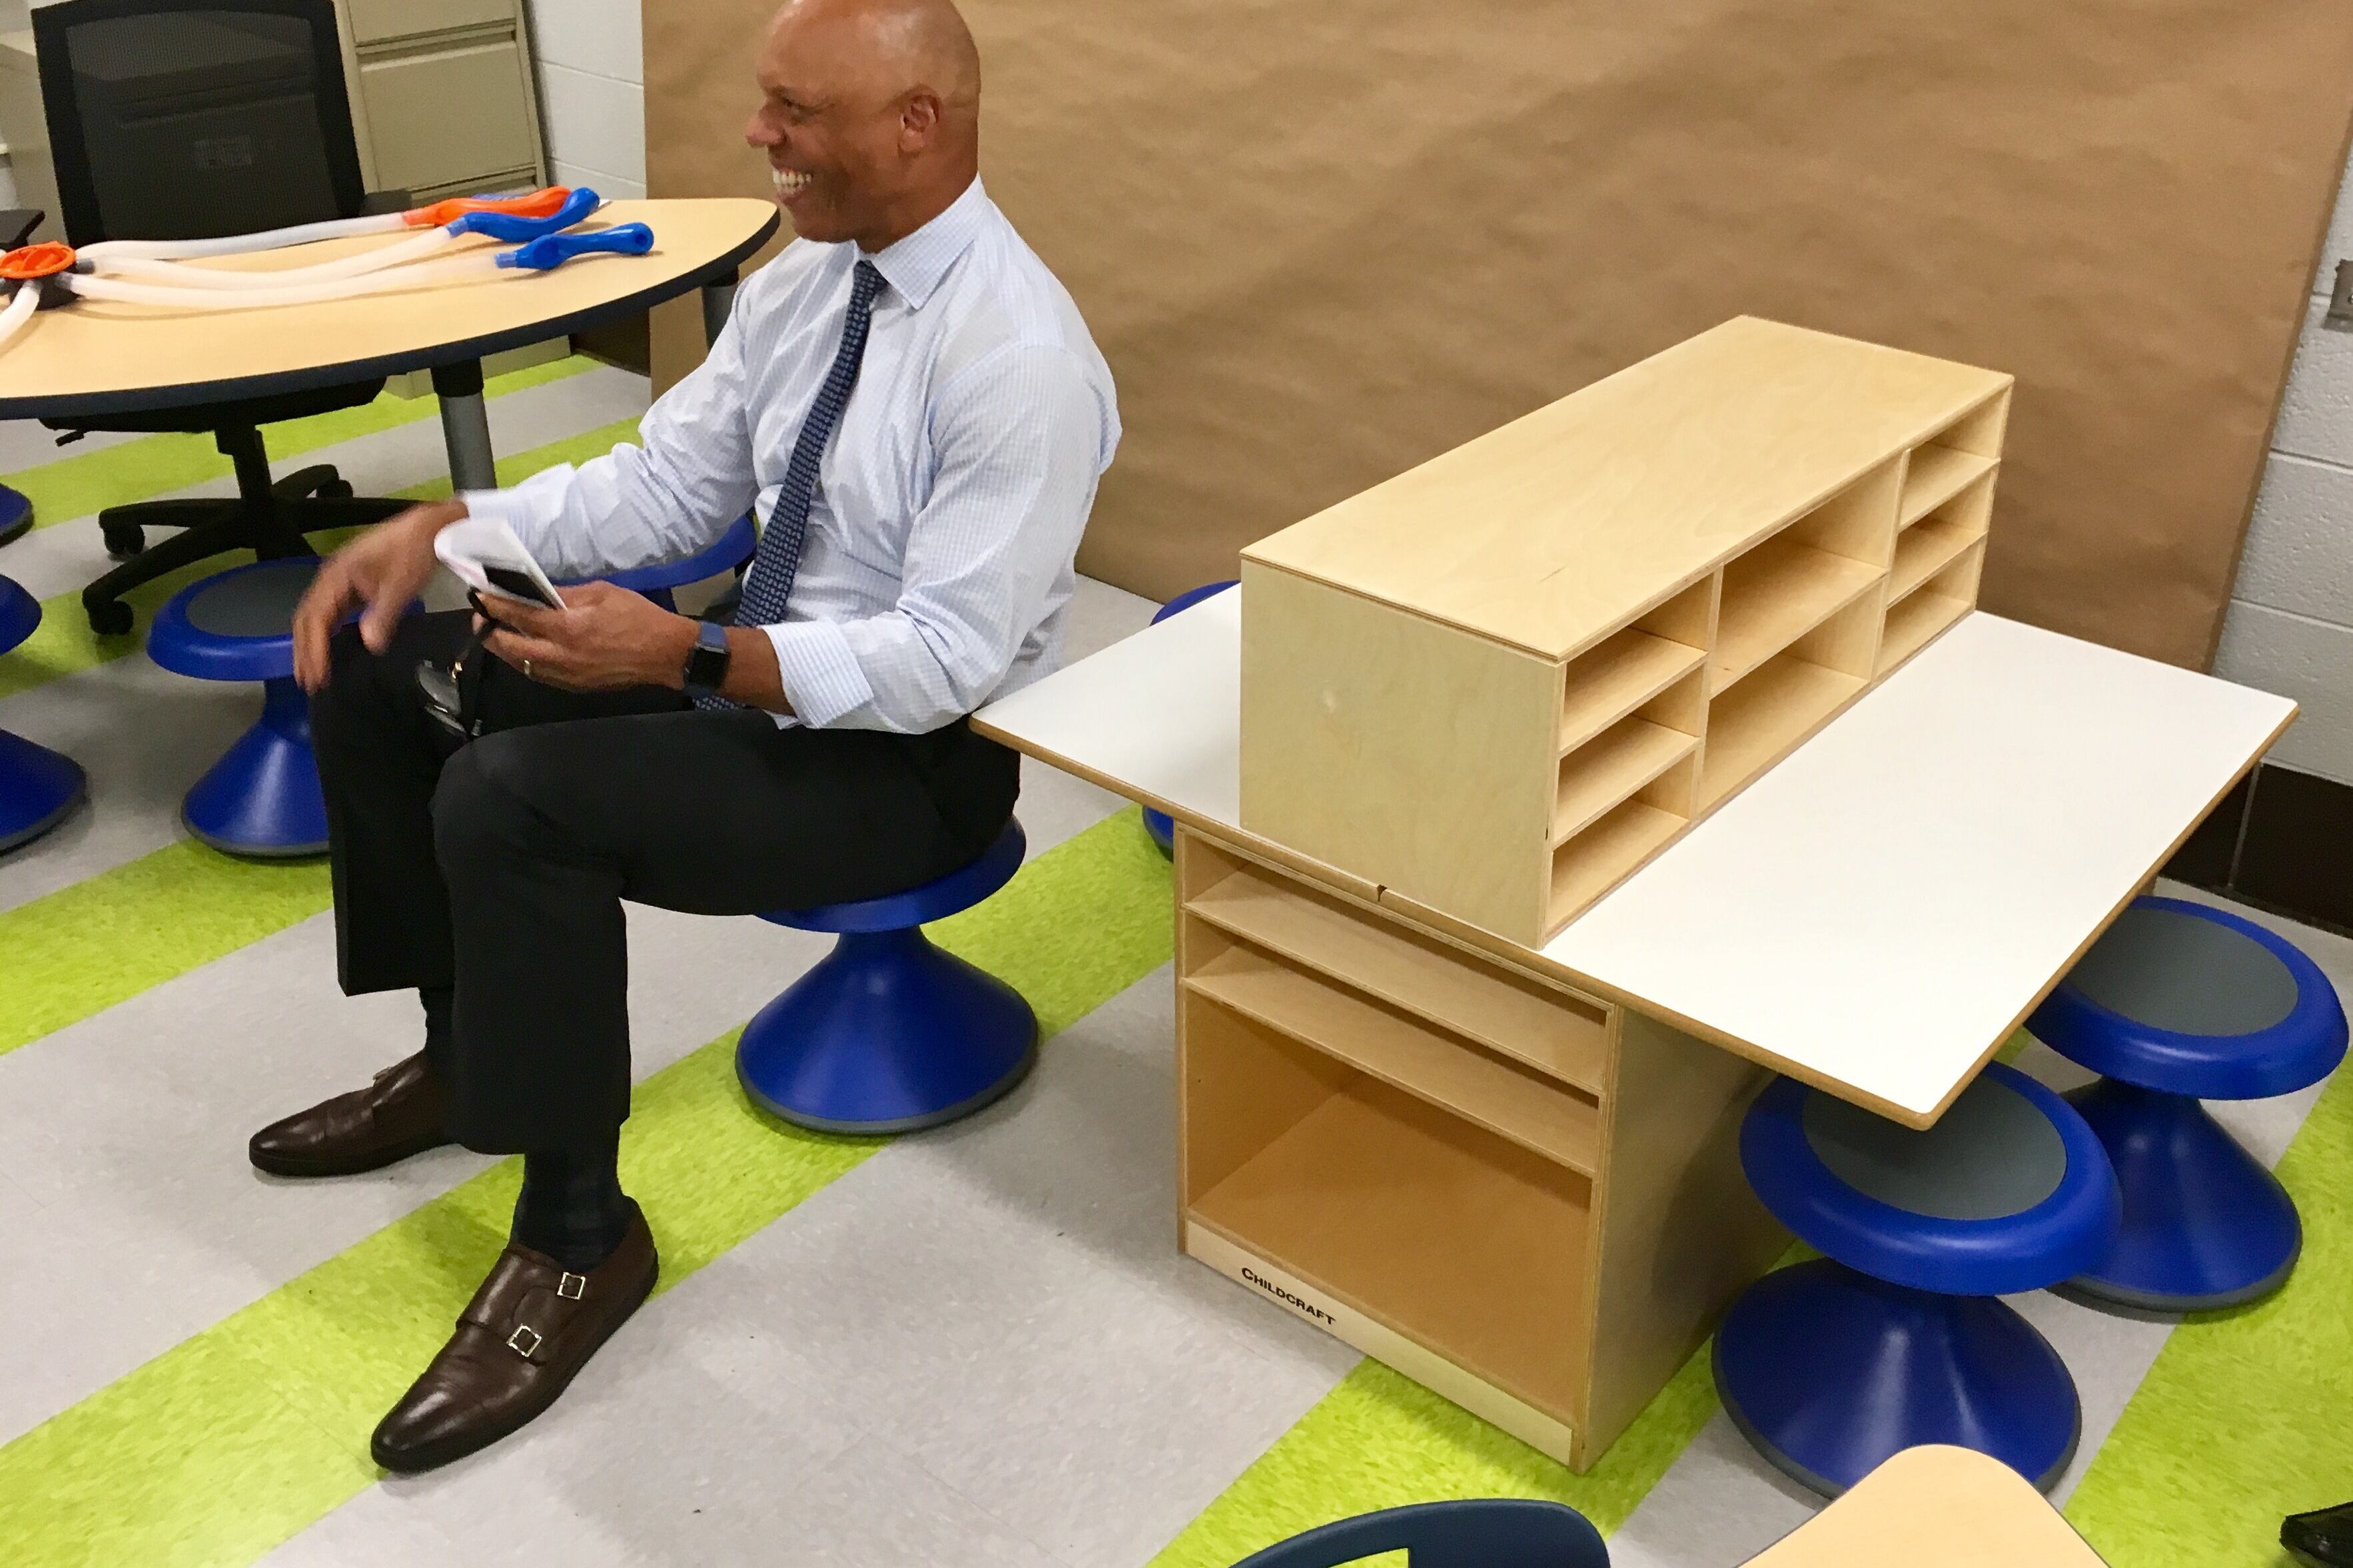 Superintendent William Hite sitting on a wobble seat and smiling.